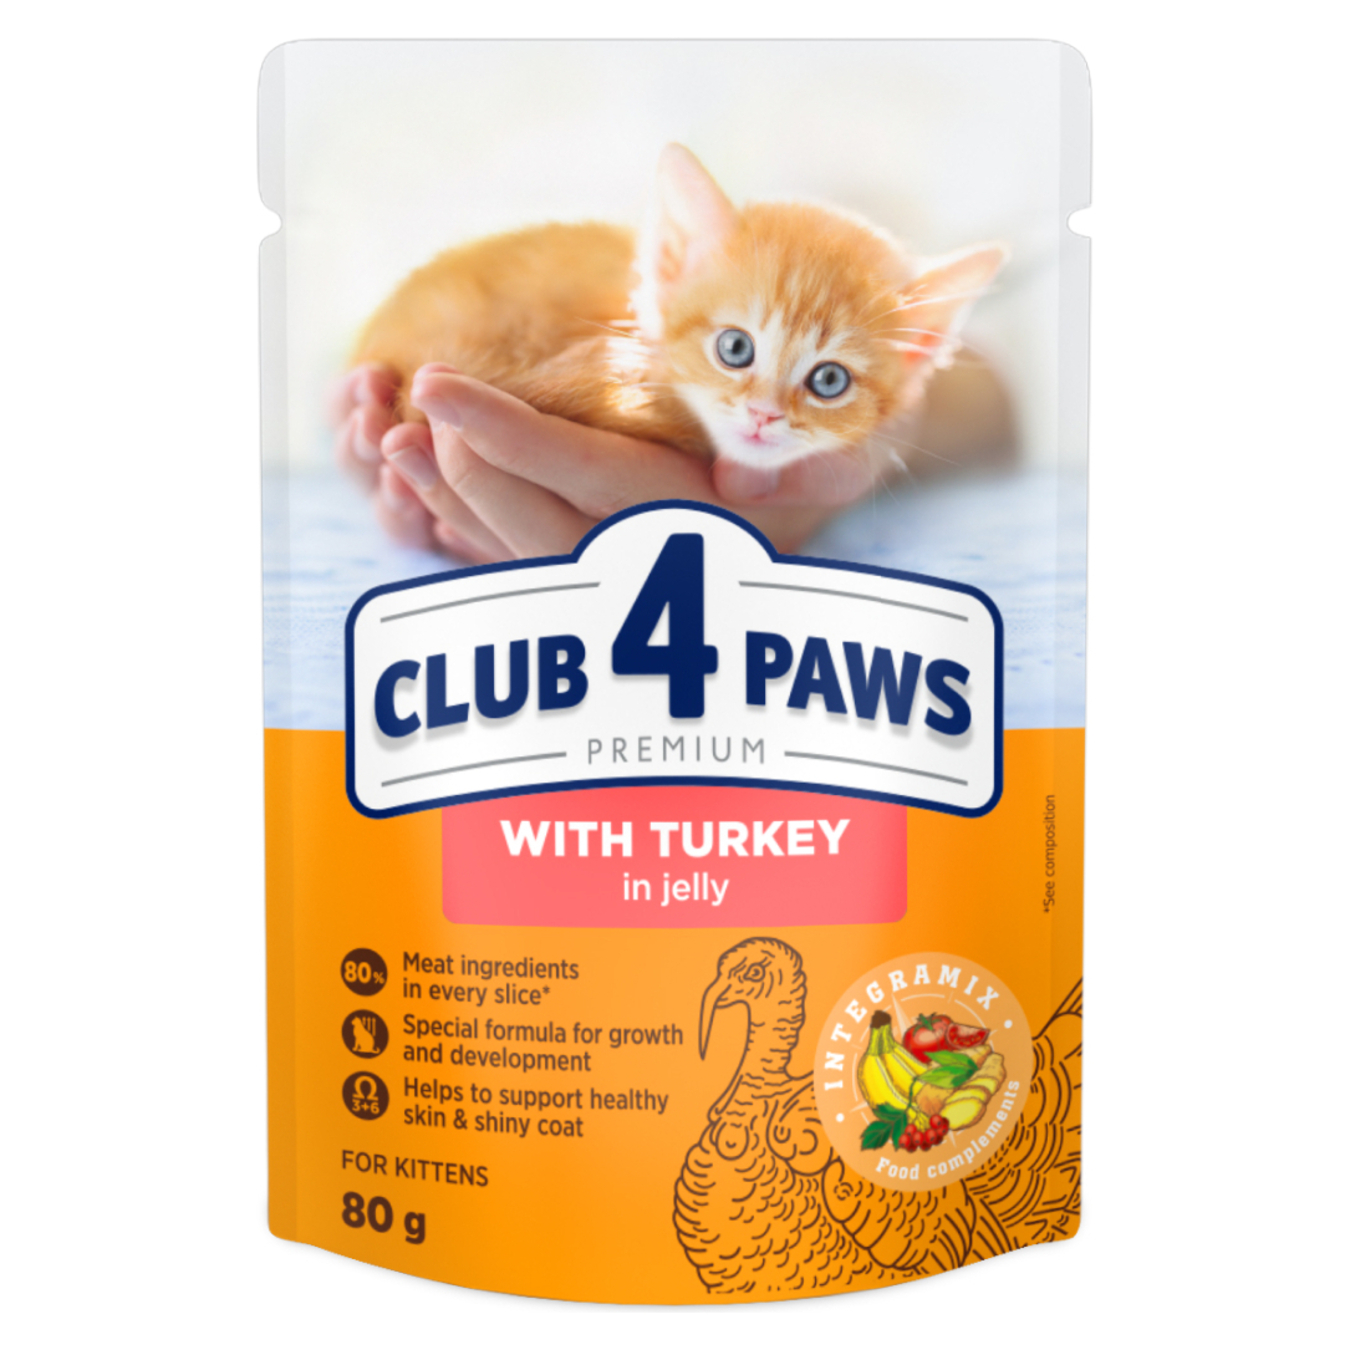 Club 4 Paws Premium with Turkey in Jelly Canned Food for Kittens 80g